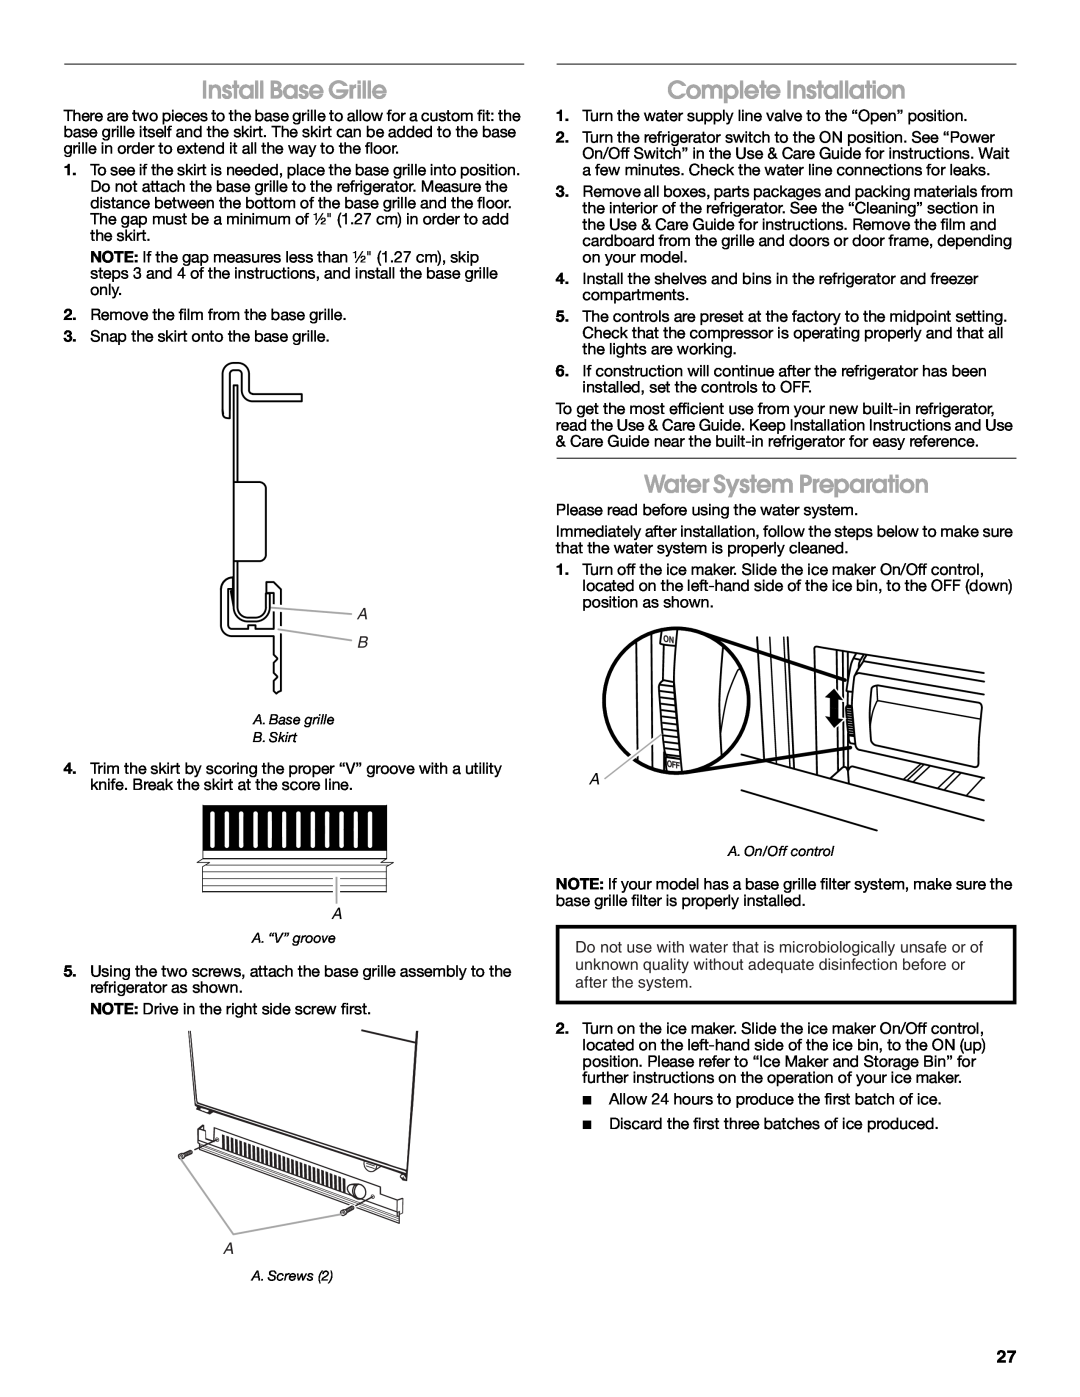 Jenn-Air W10183782A manual Install Base Grille, Complete Installation, Water System Preparation 